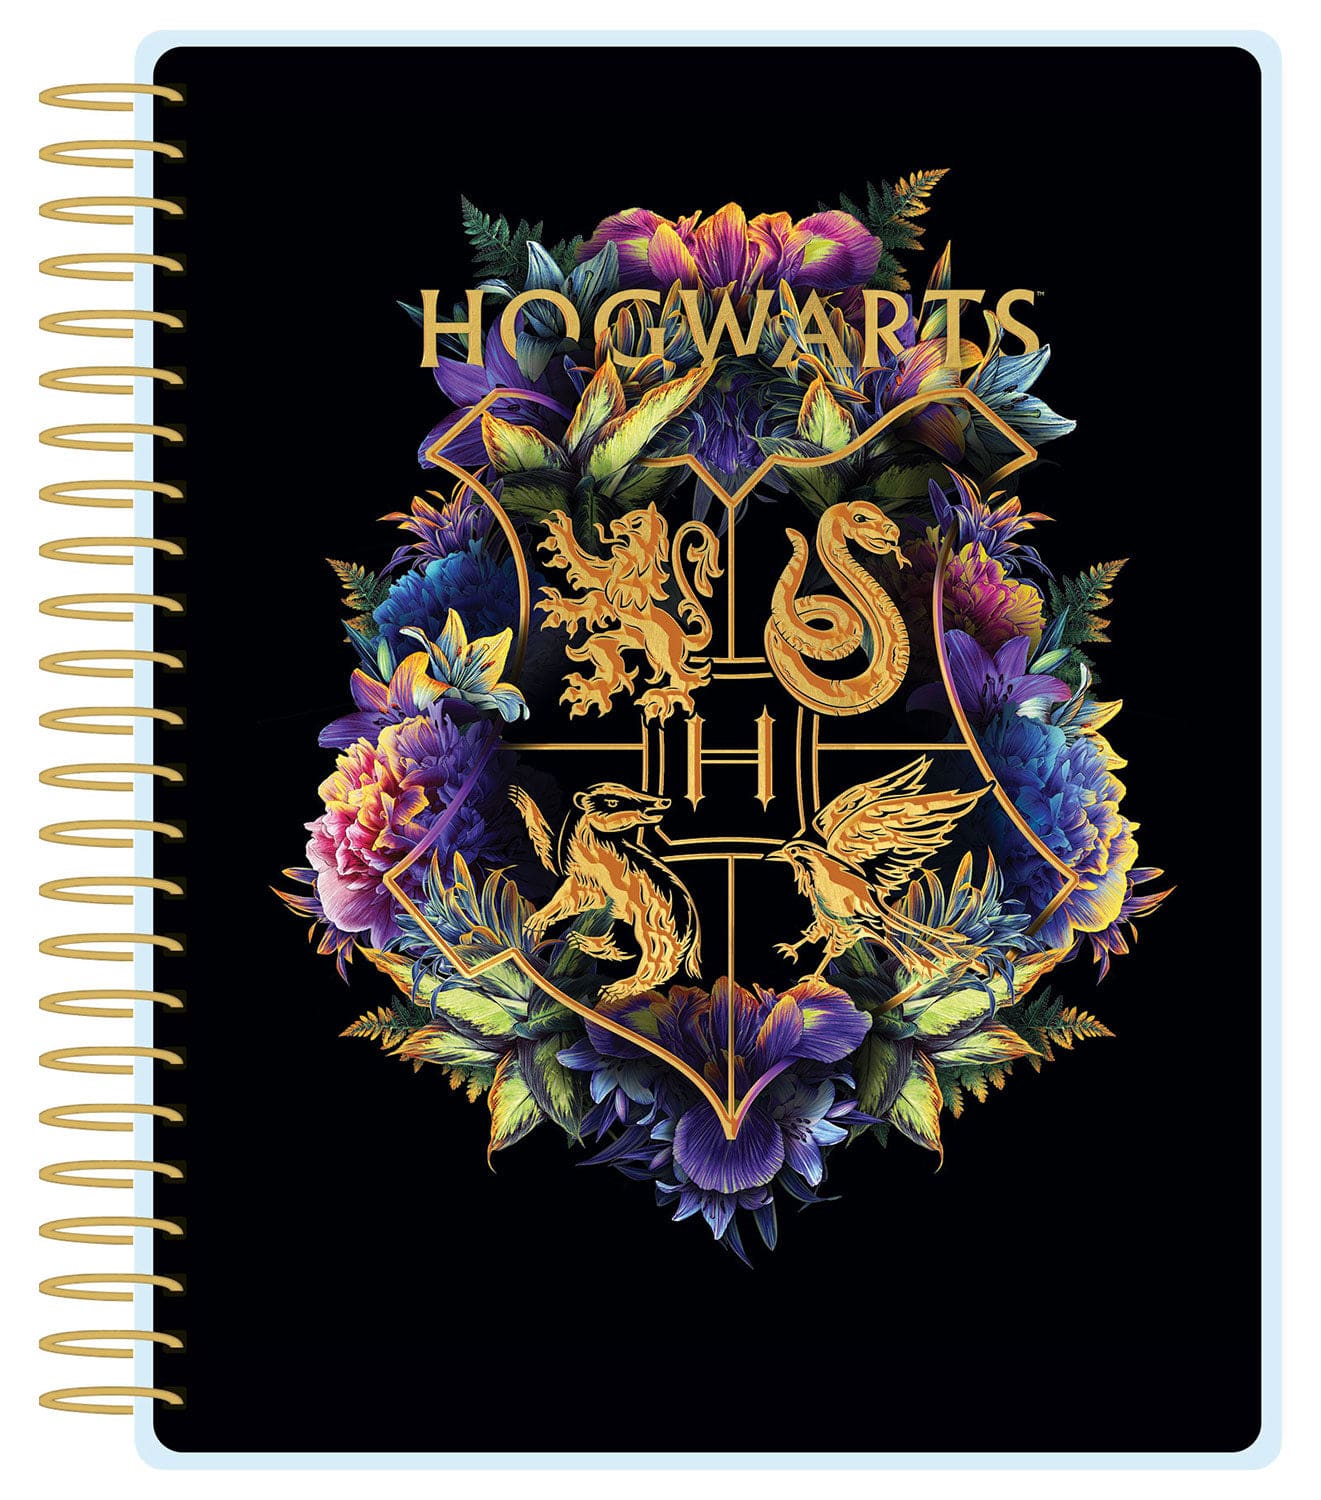 Paper House Productions Set-0007 Harry Potter Planner Bundle, Includes Weekly Kit Decorative Stickers